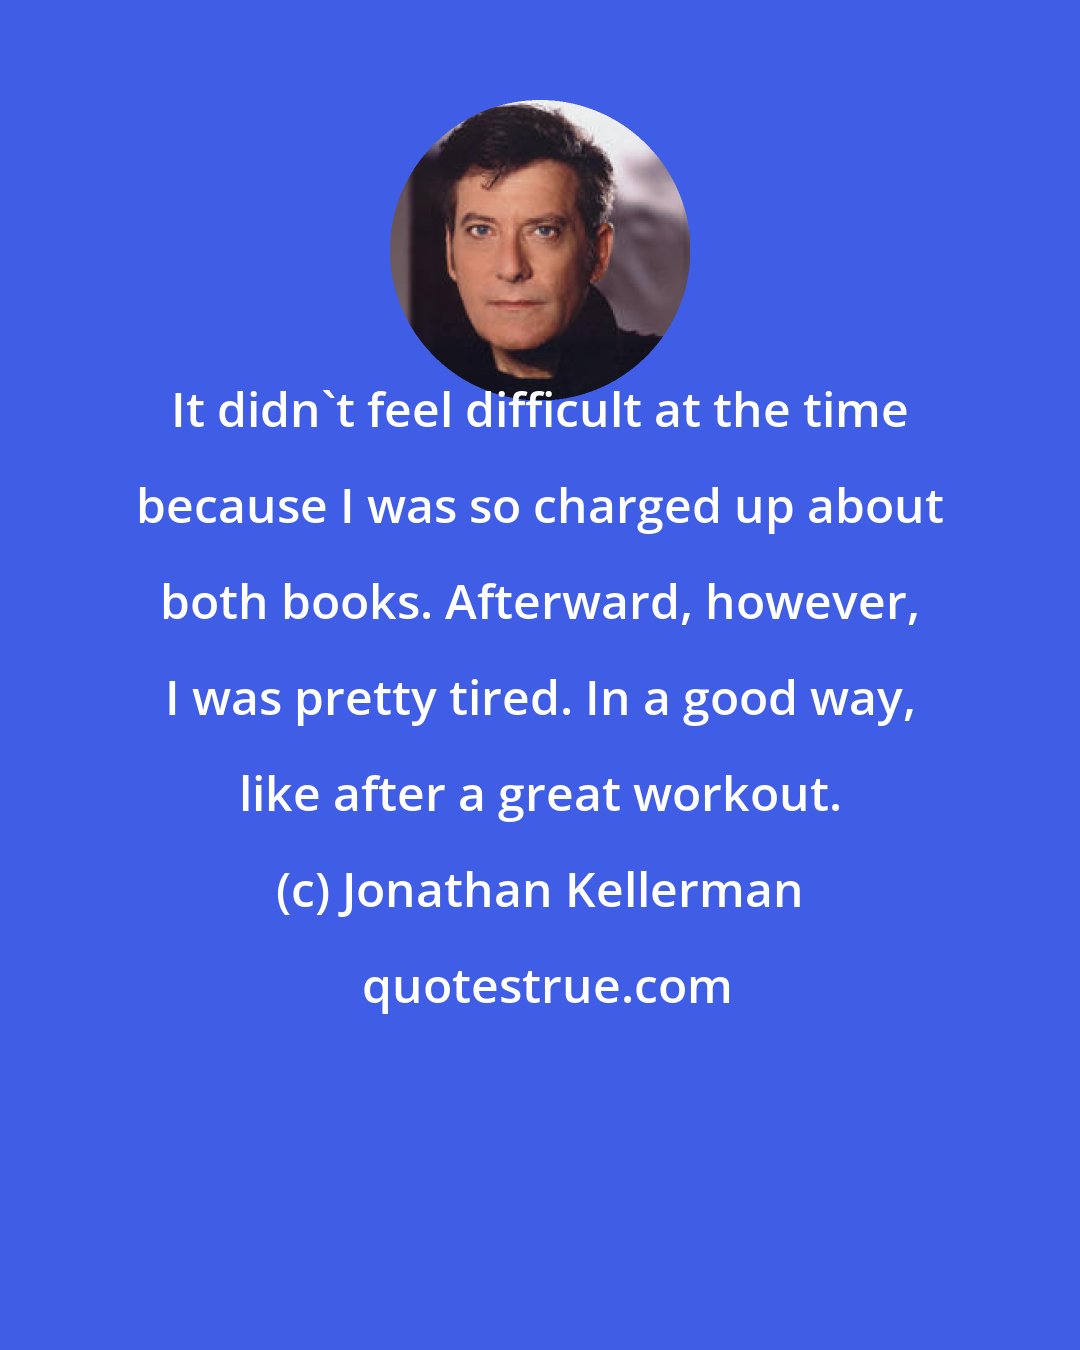 Jonathan Kellerman: It didn't feel difficult at the time because I was so charged up about both books. Afterward, however, I was pretty tired. In a good way, like after a great workout.